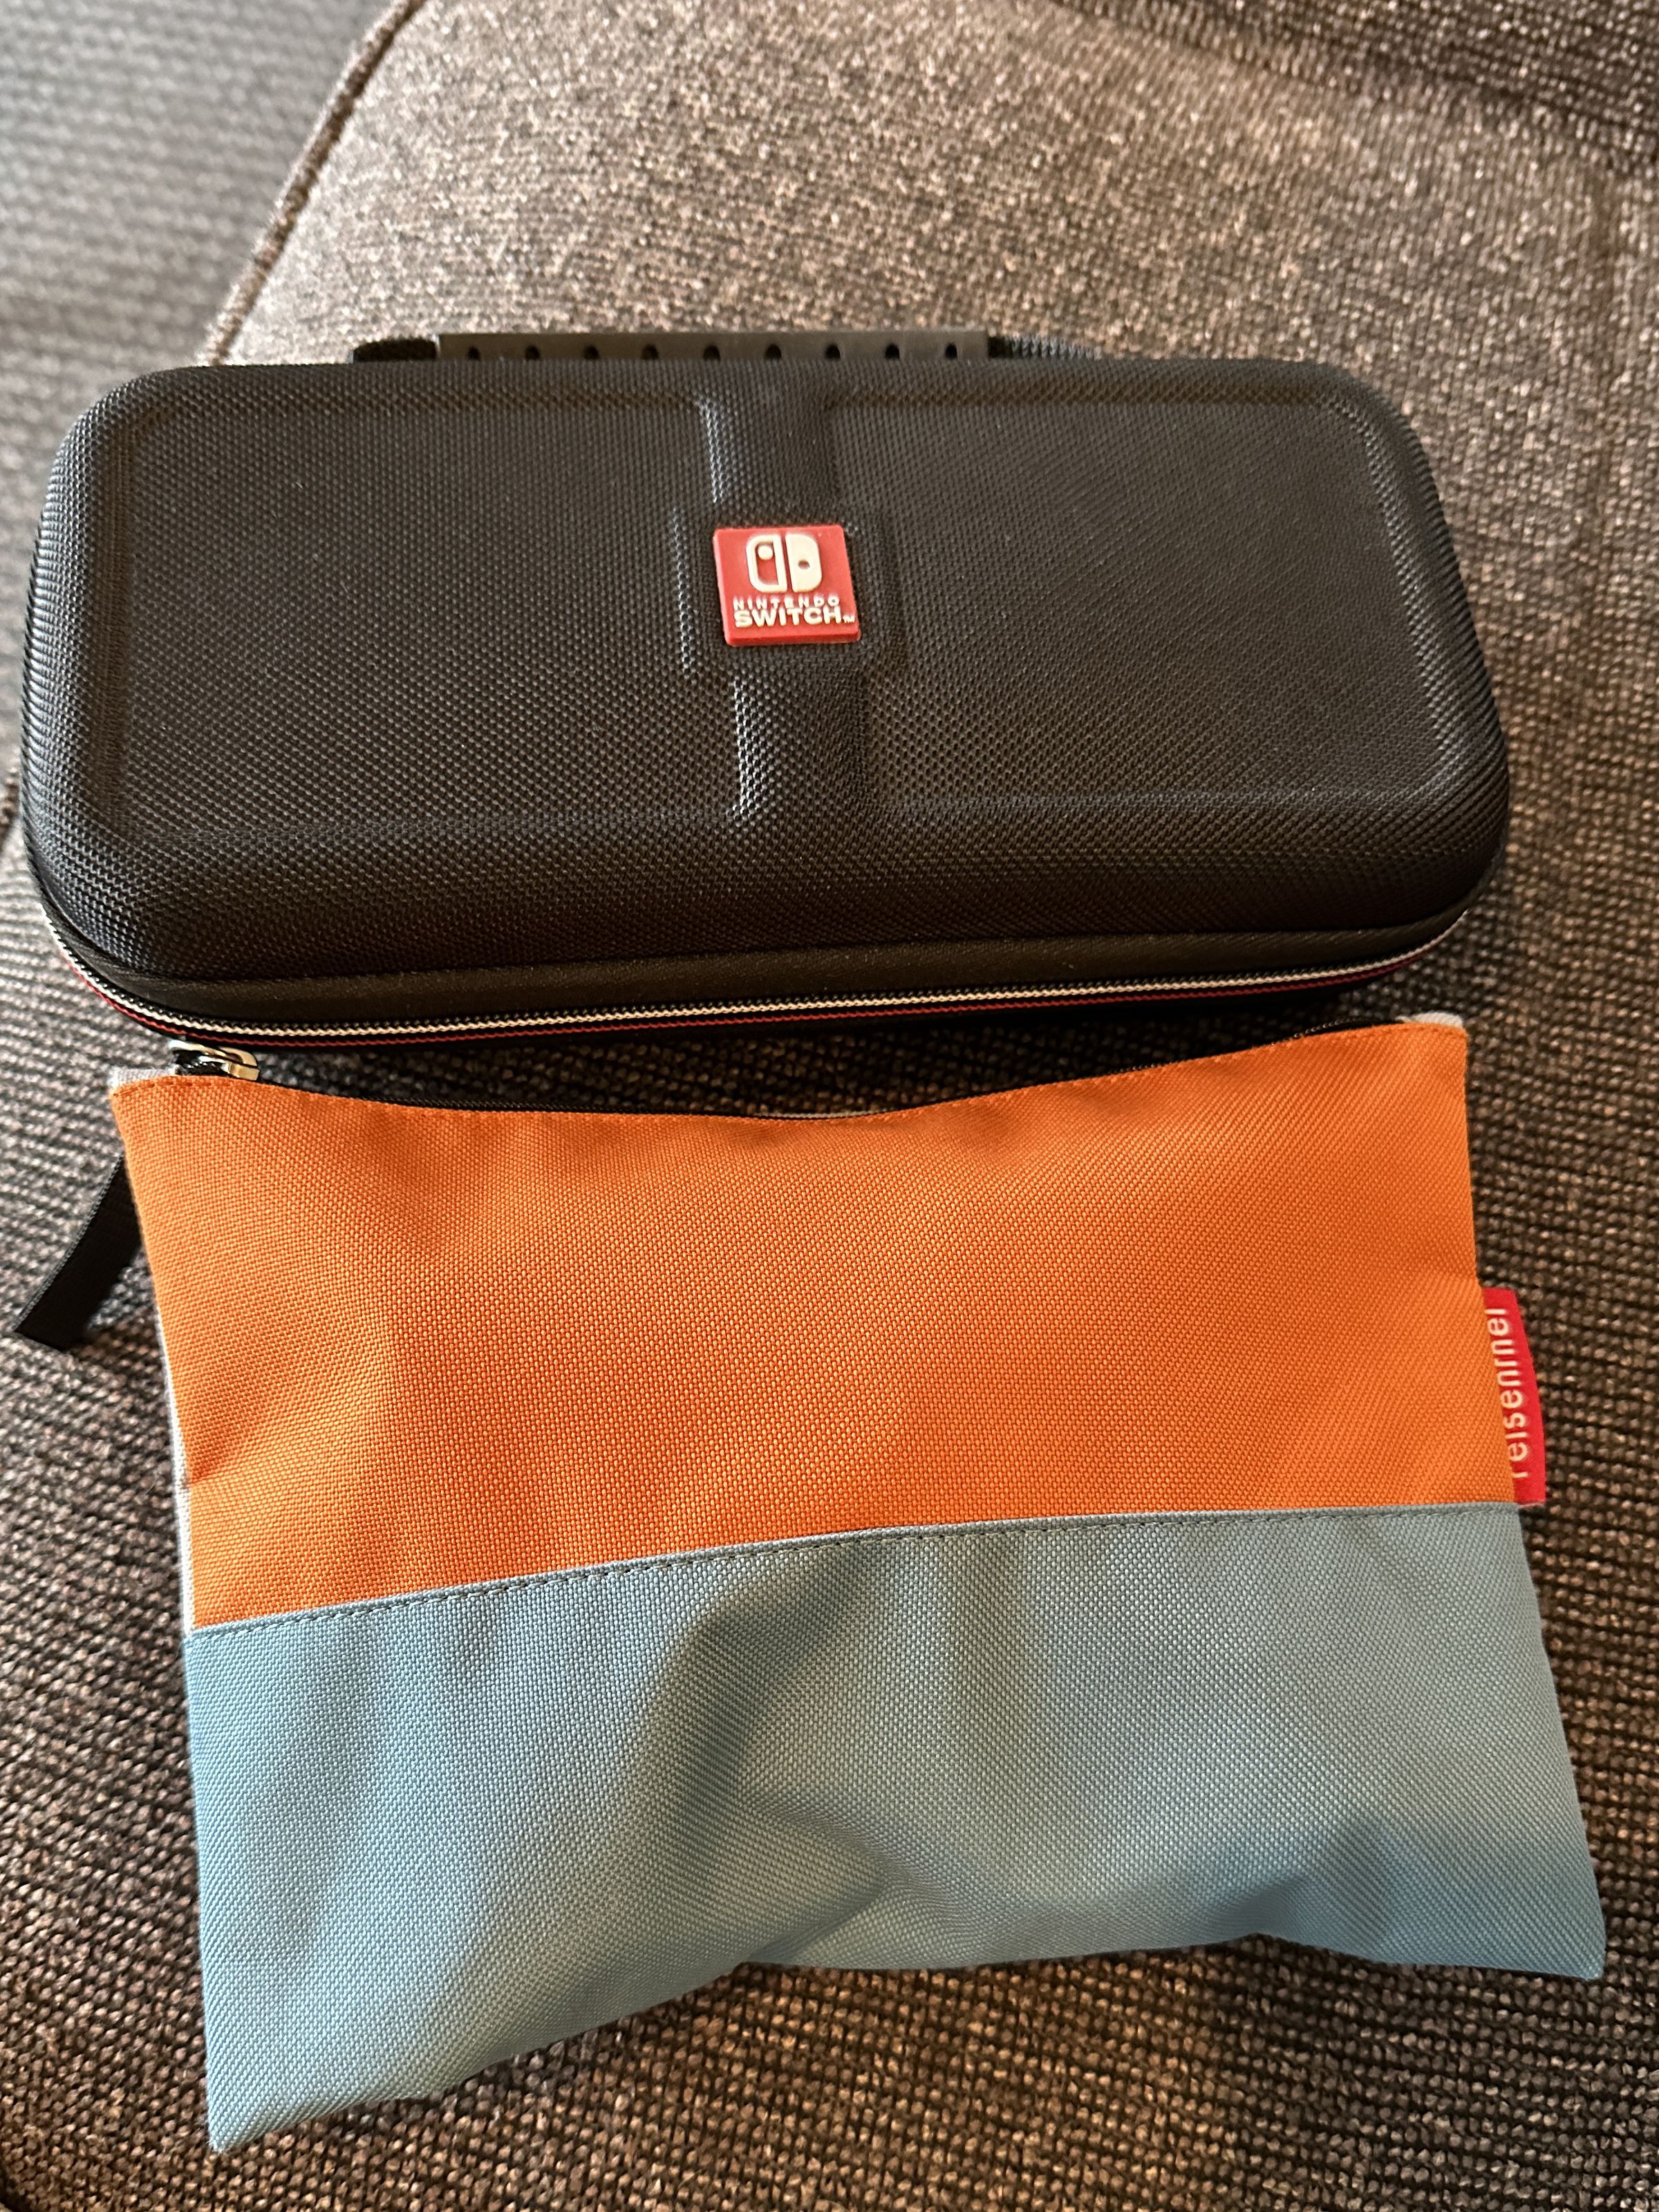 The Switch in its carrying case, and everything else in a little pencil pouch. What a time to be alive.